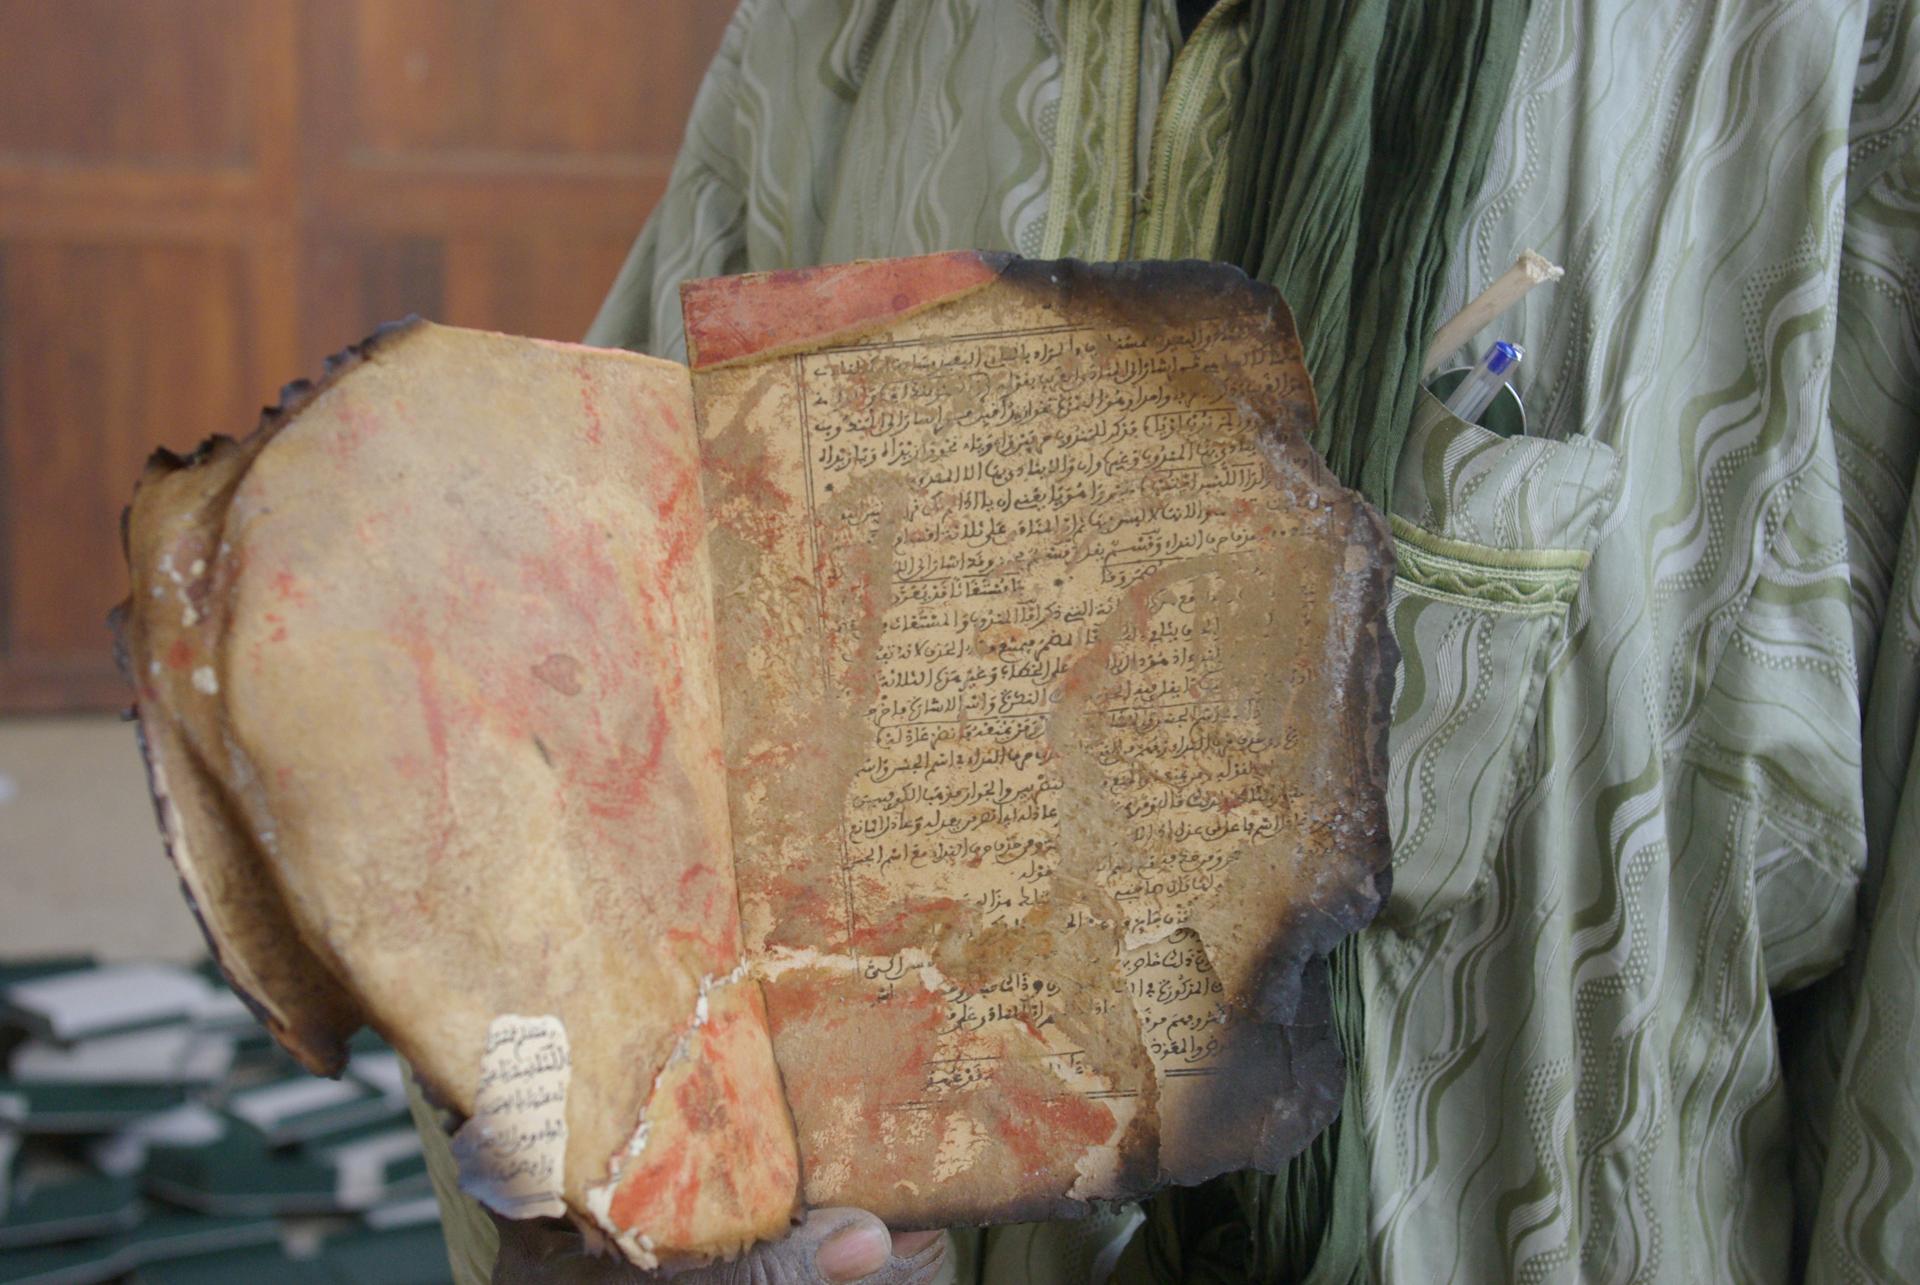 In 2012 and 2013, Mali's cultural heritage, including its ancient manuscripts, was severely damaged